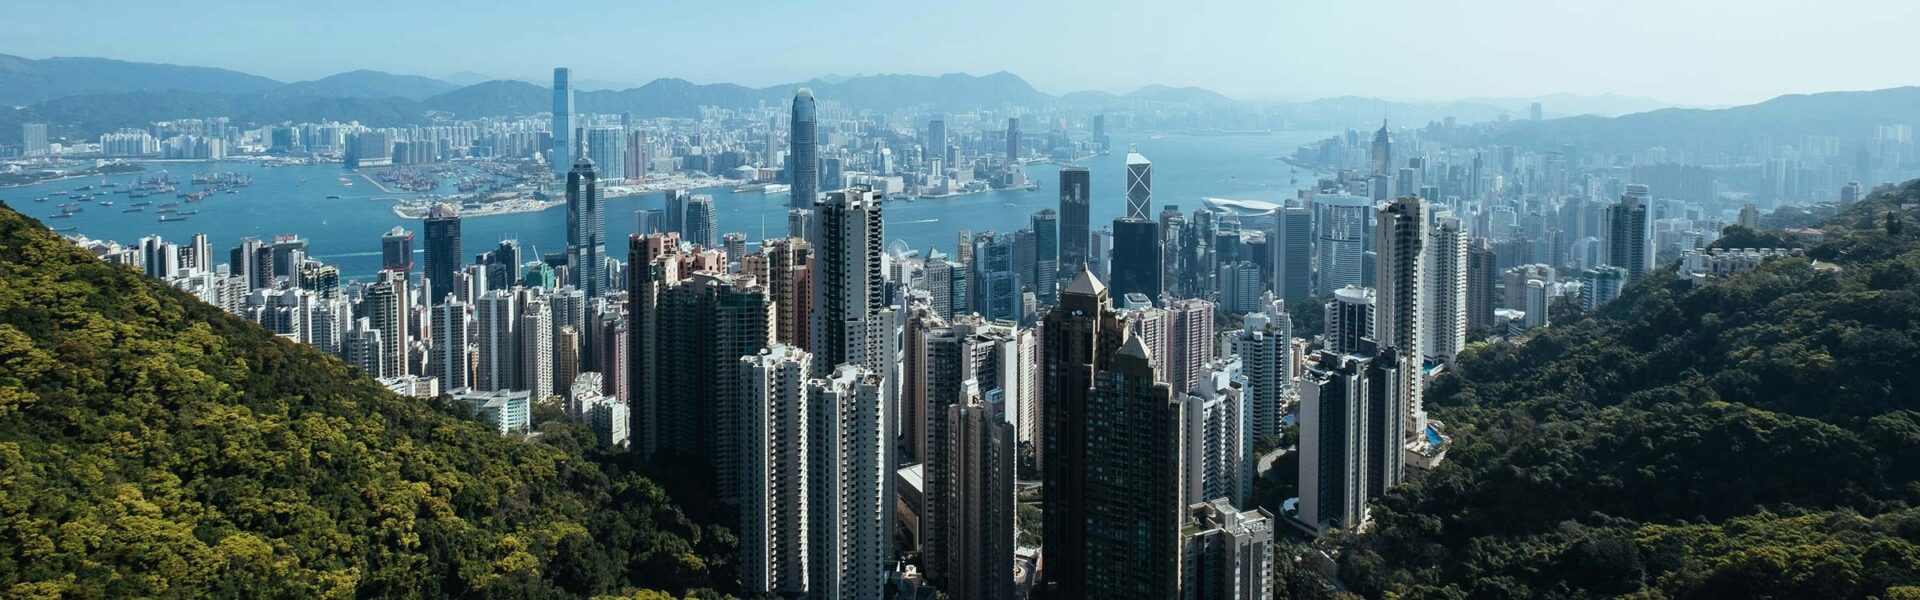 An aerial view of the city of Hong Kong